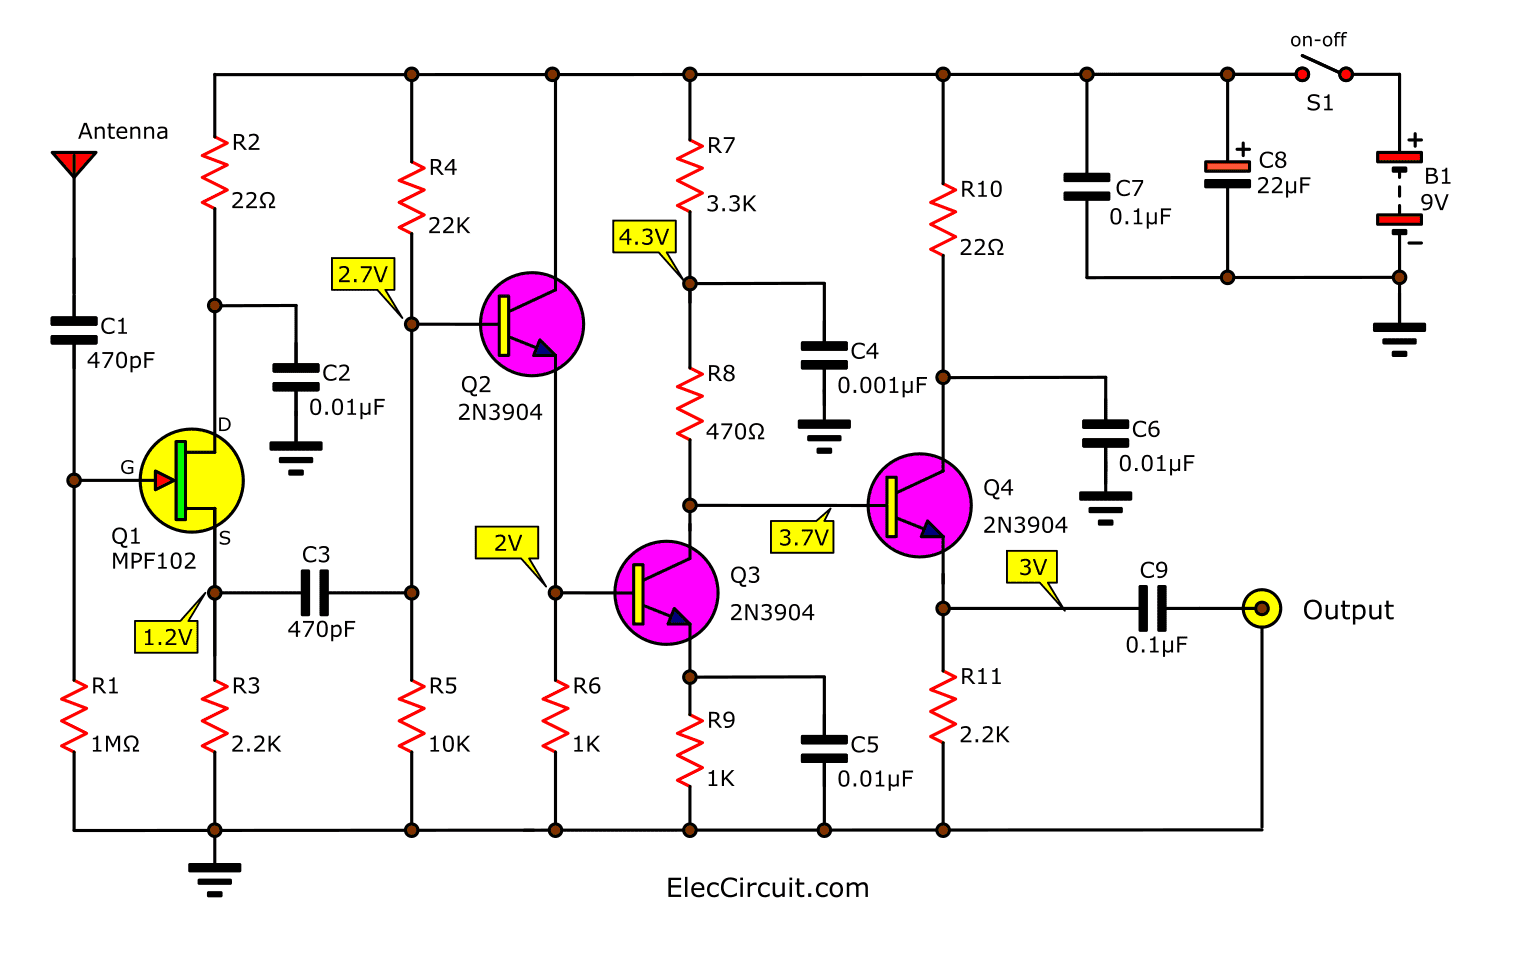 Simple Active antenna in SW/MW/FM bands - ElecCircuit